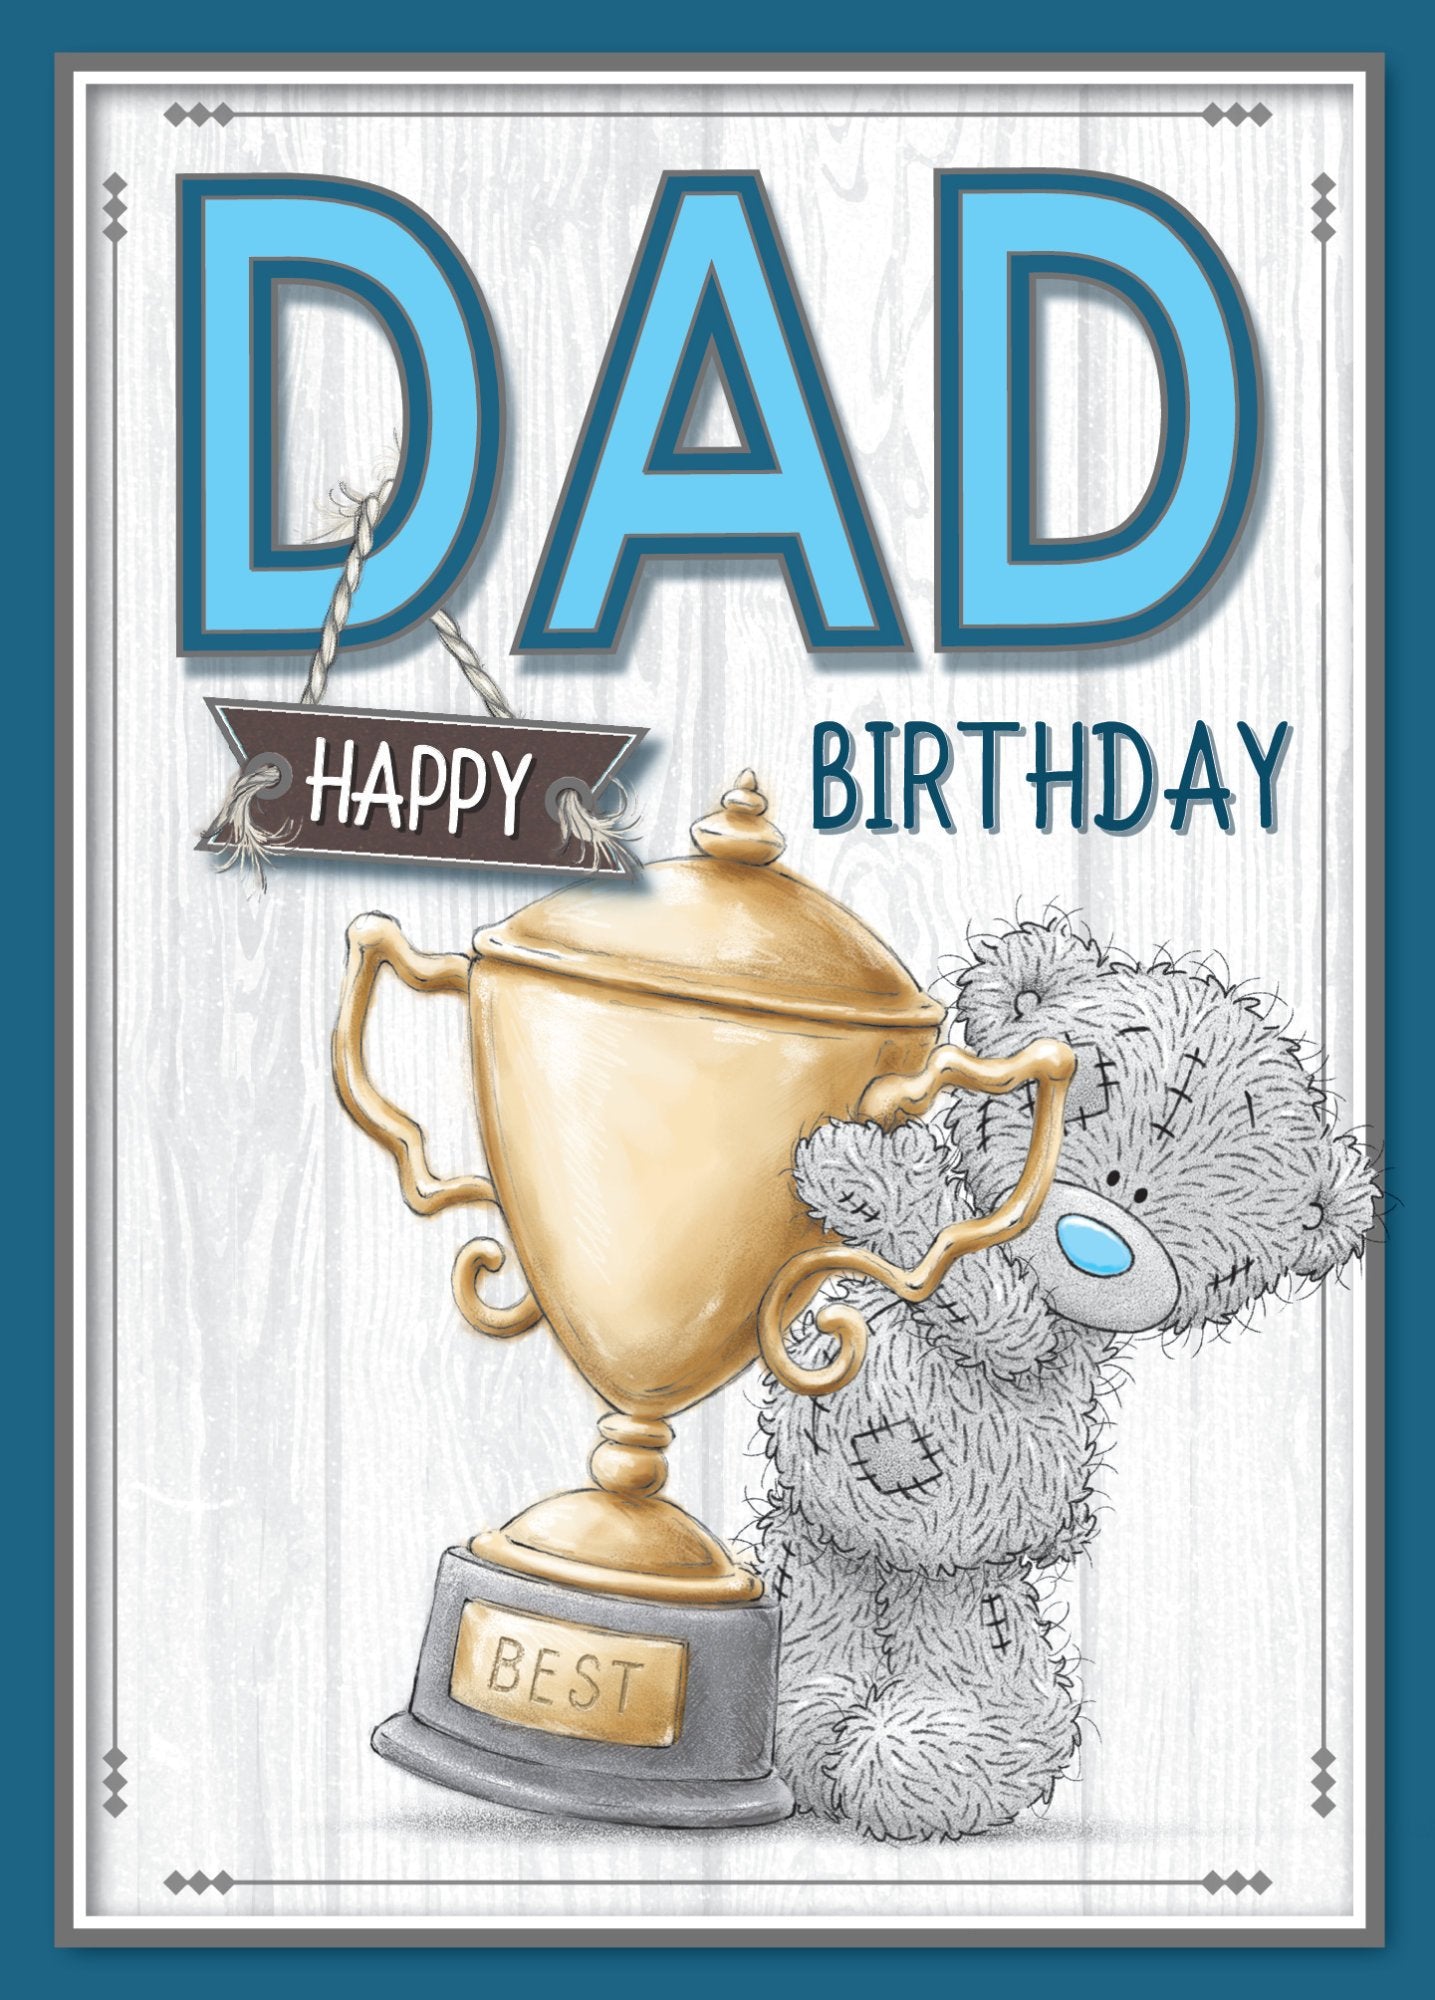 Photograph of Dad Birthday Teddy Champ Greetings Card at Nicole's Shop